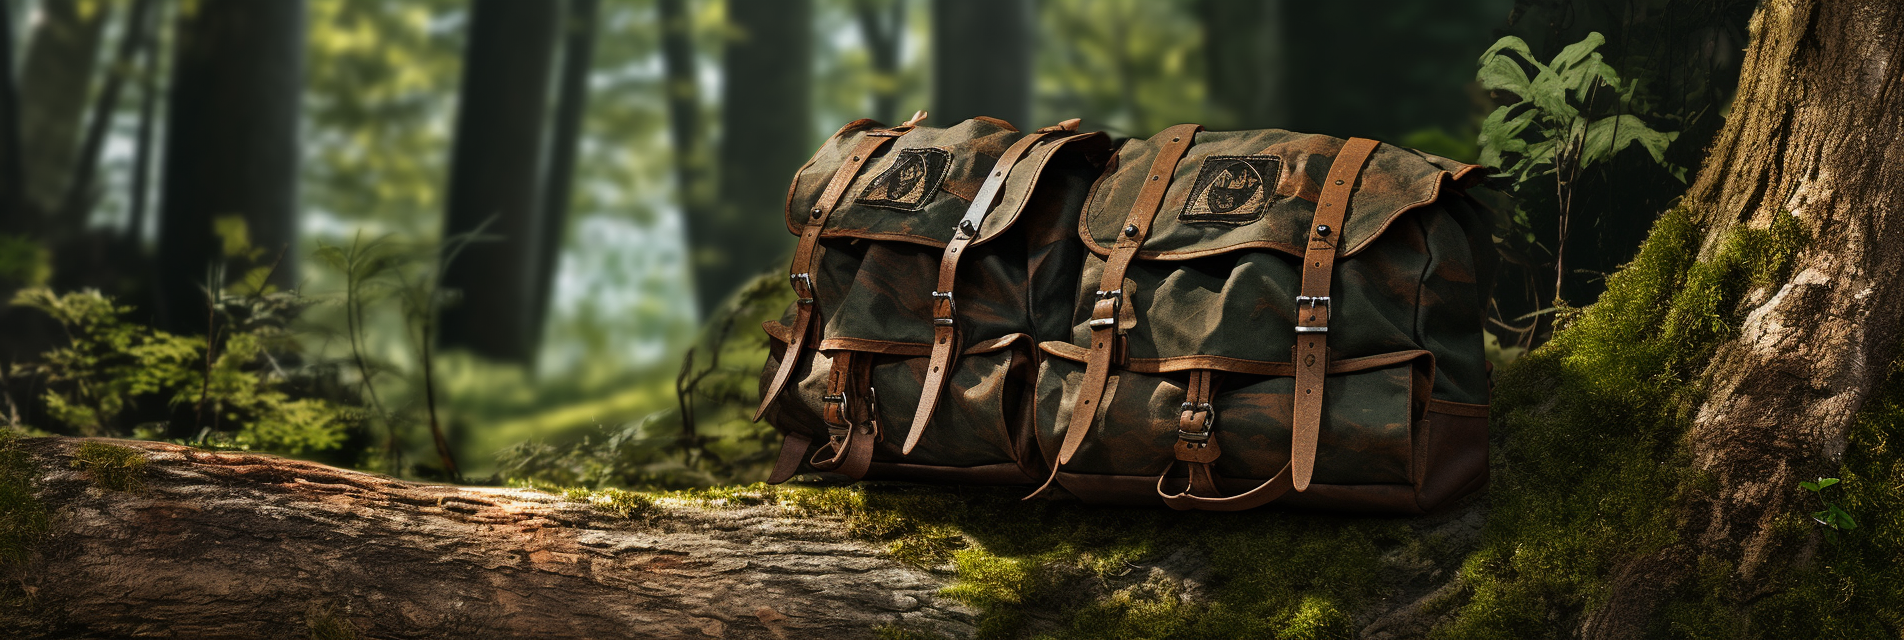 olda8689_ultra_realistic_outdoor_buschcraft_bag_and_8802a177-7443-4263-945d-5a8b07ef2129